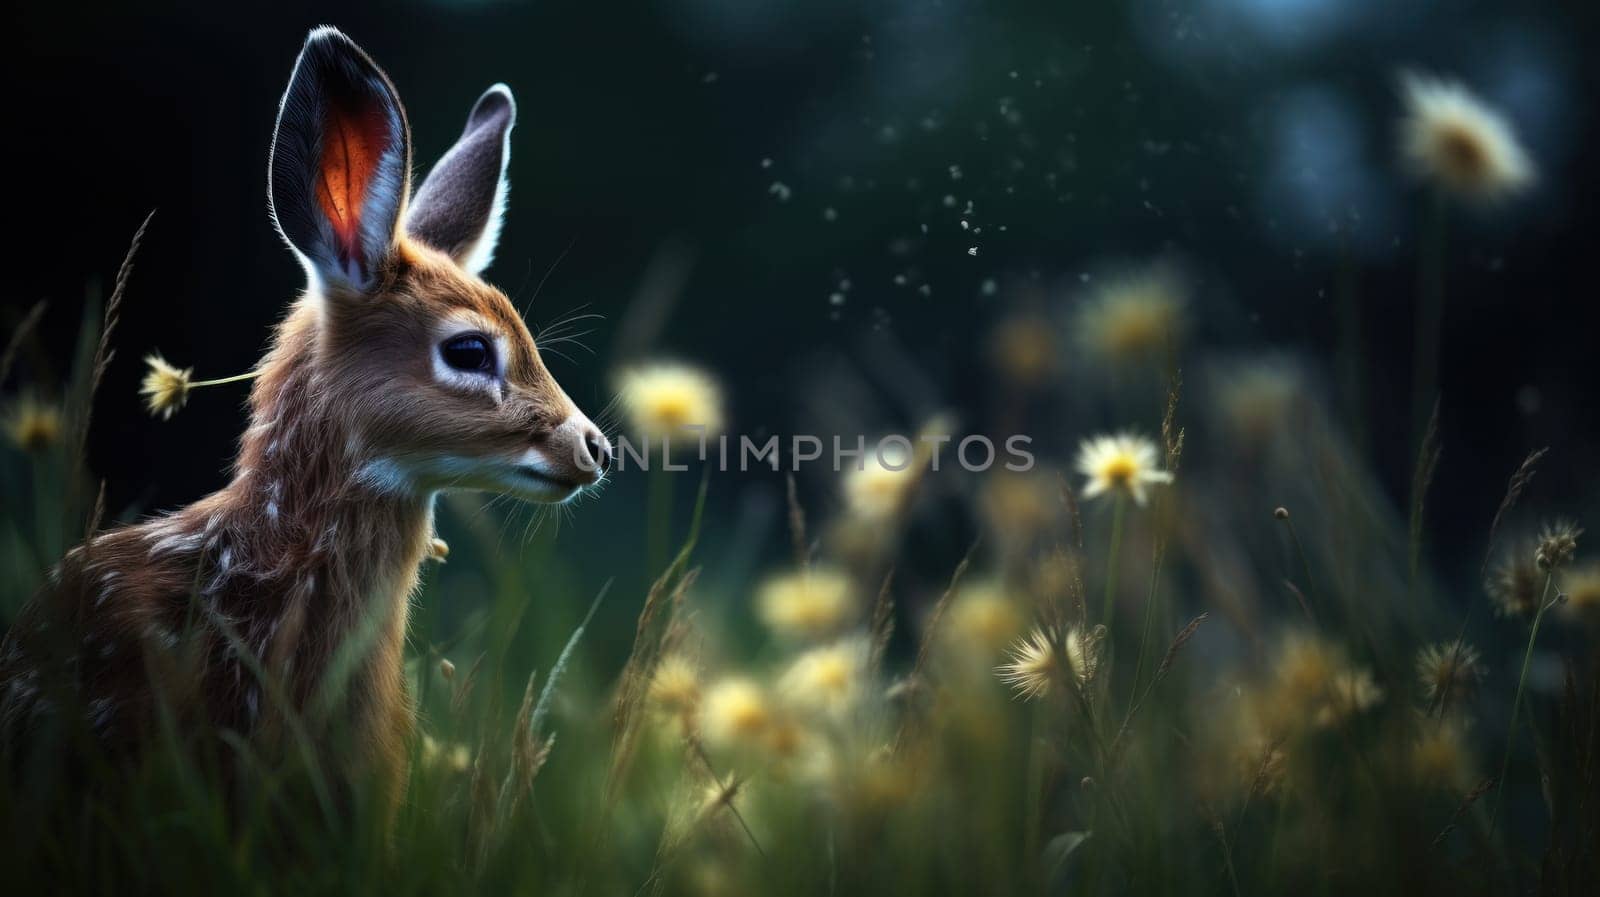 A deer is standing in a field of flowers with the sun behind it